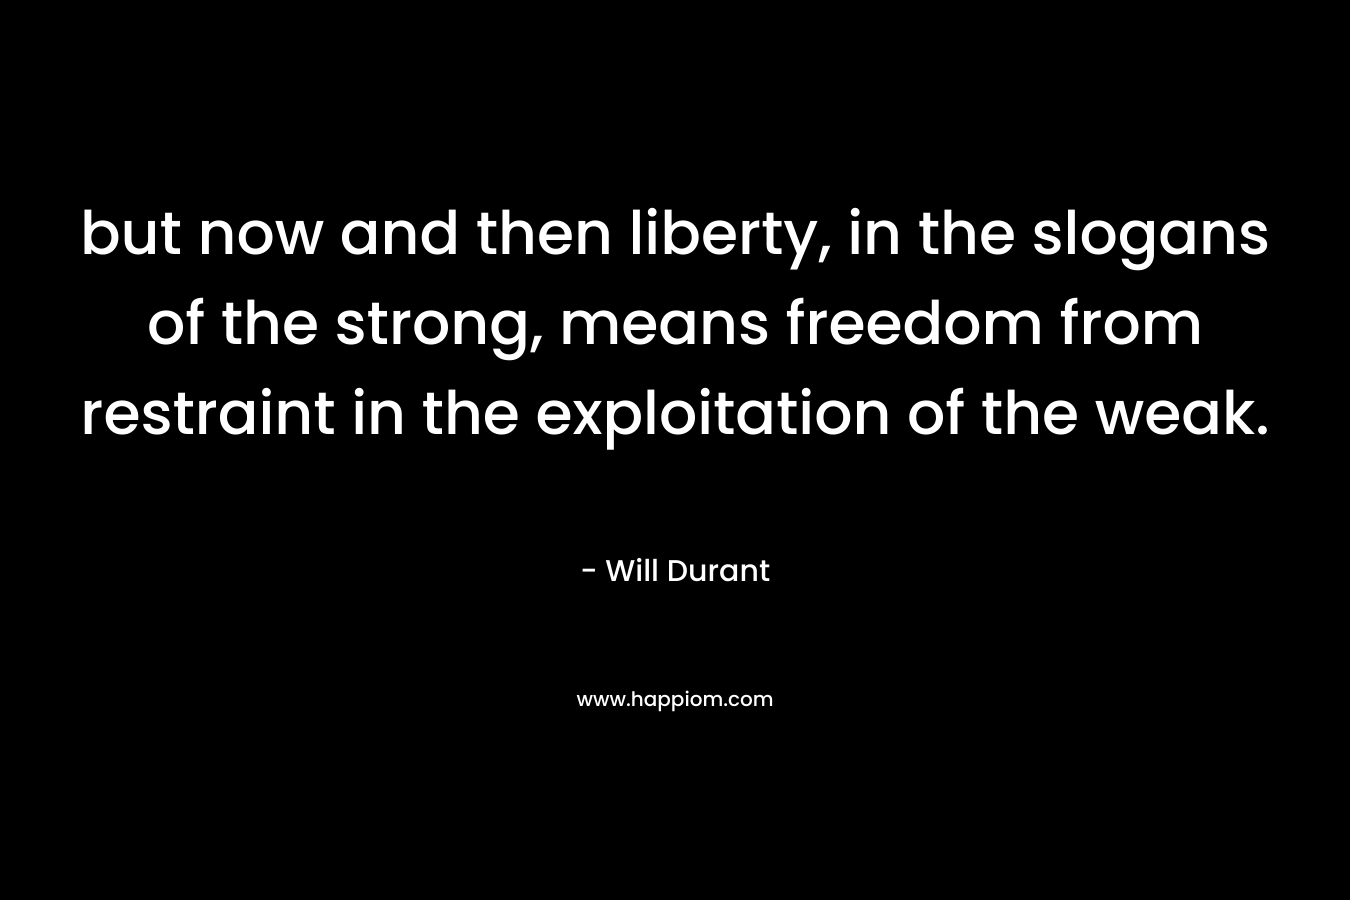 but now and then liberty, in the slogans of the strong, means freedom from restraint in the exploitation of the weak.